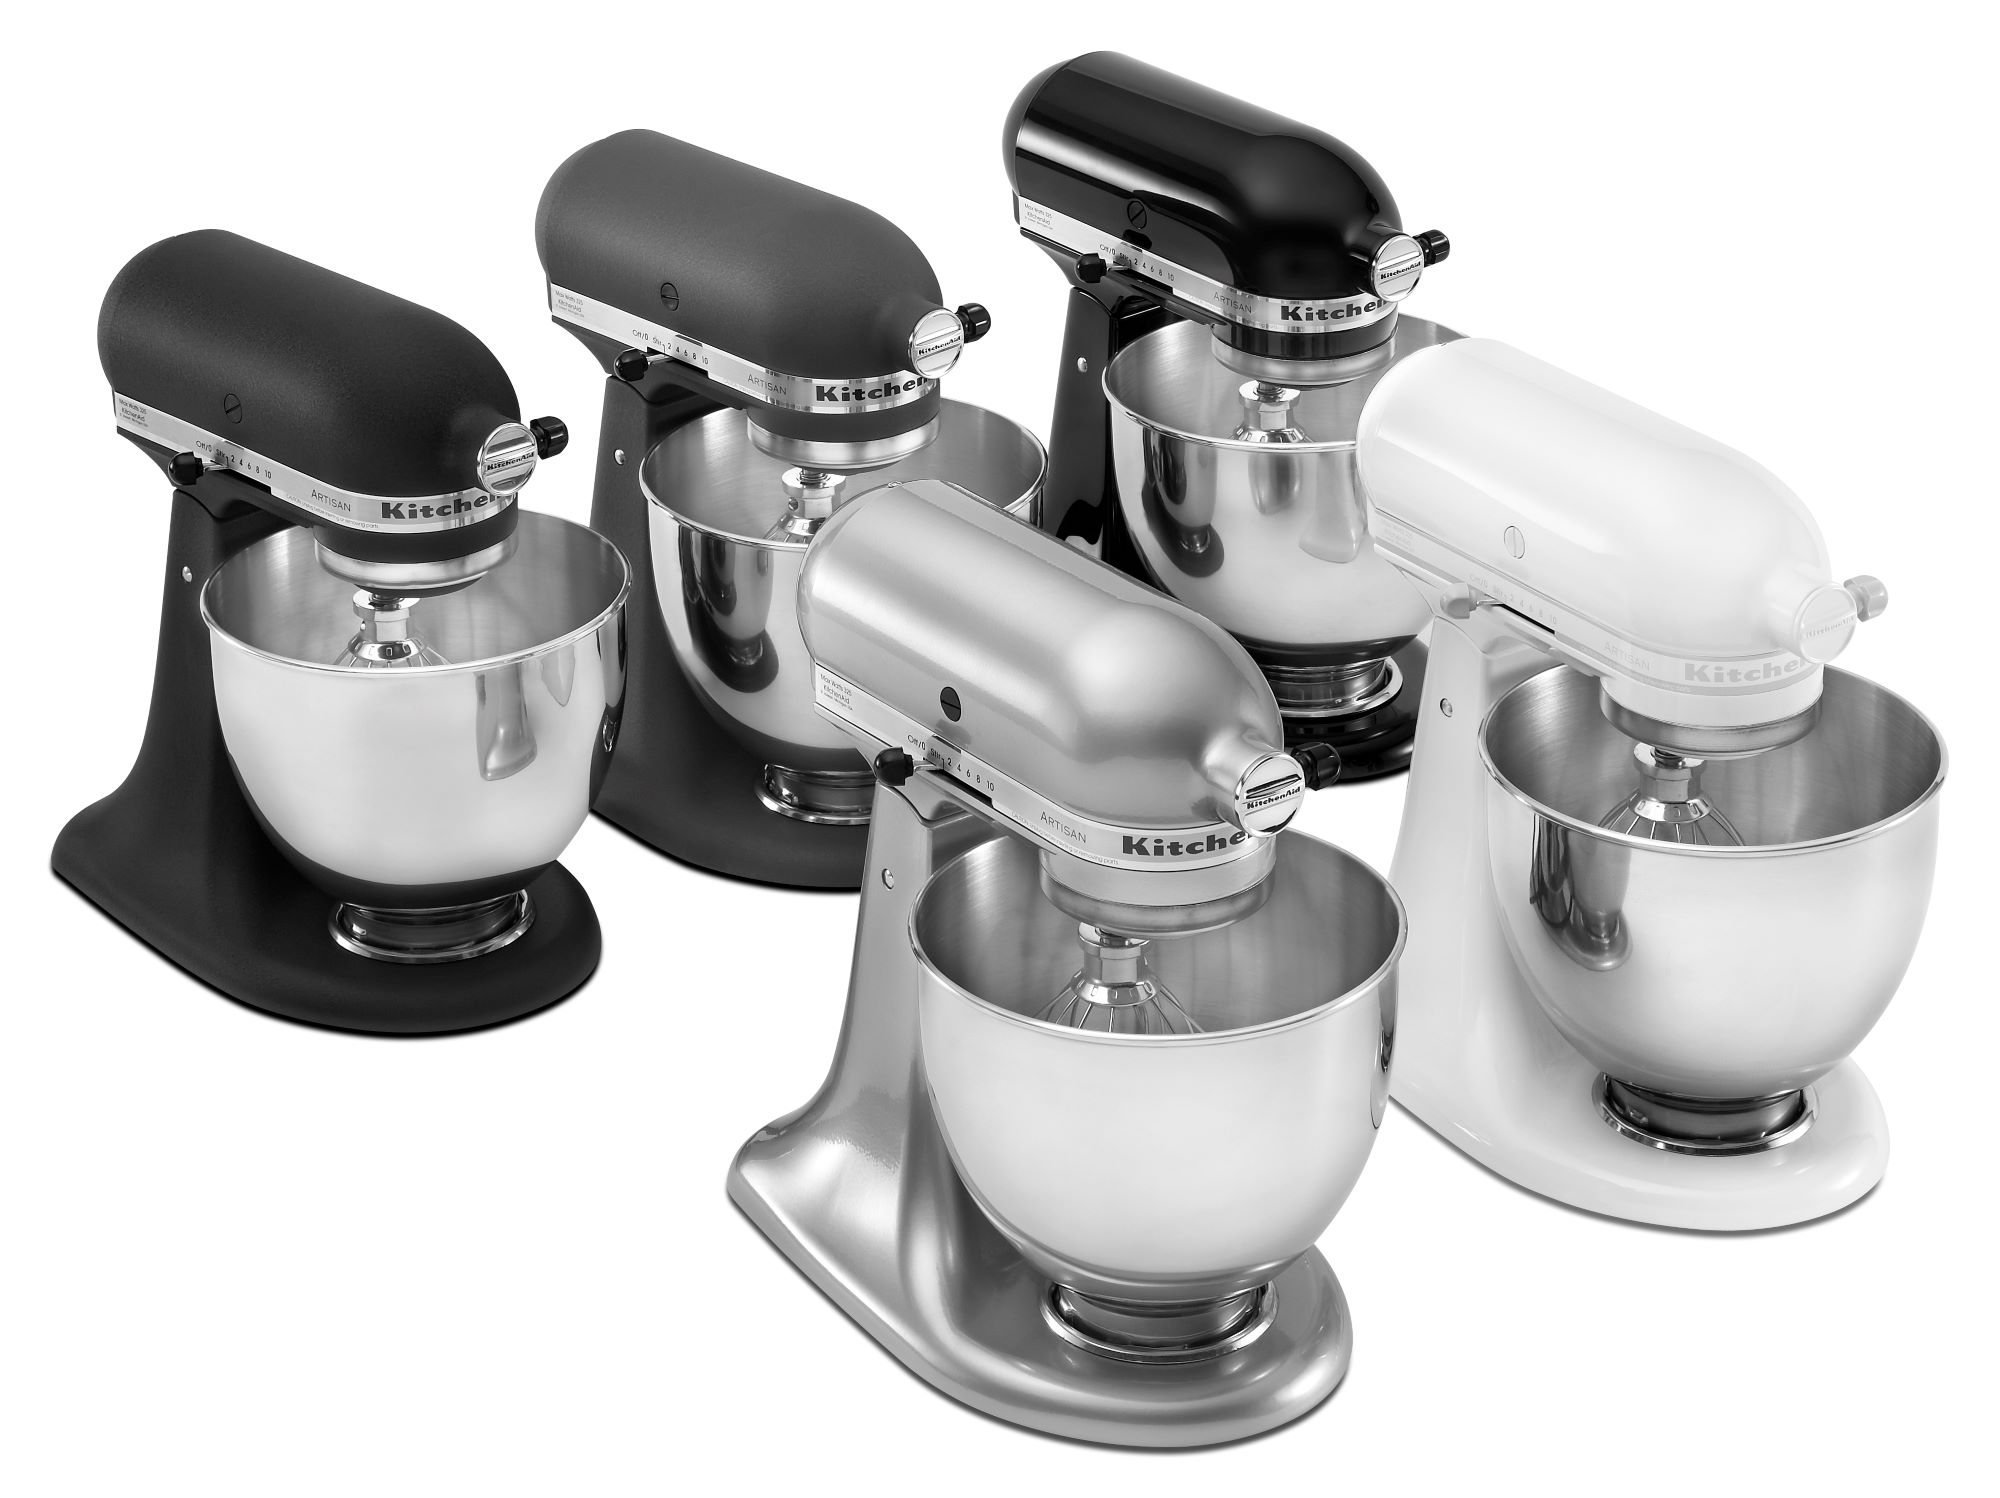 at 5-Quart in 10-Speed KitchenAid Mixers Mixer the Residential Stand Artisan Imperial Series Black Stand department